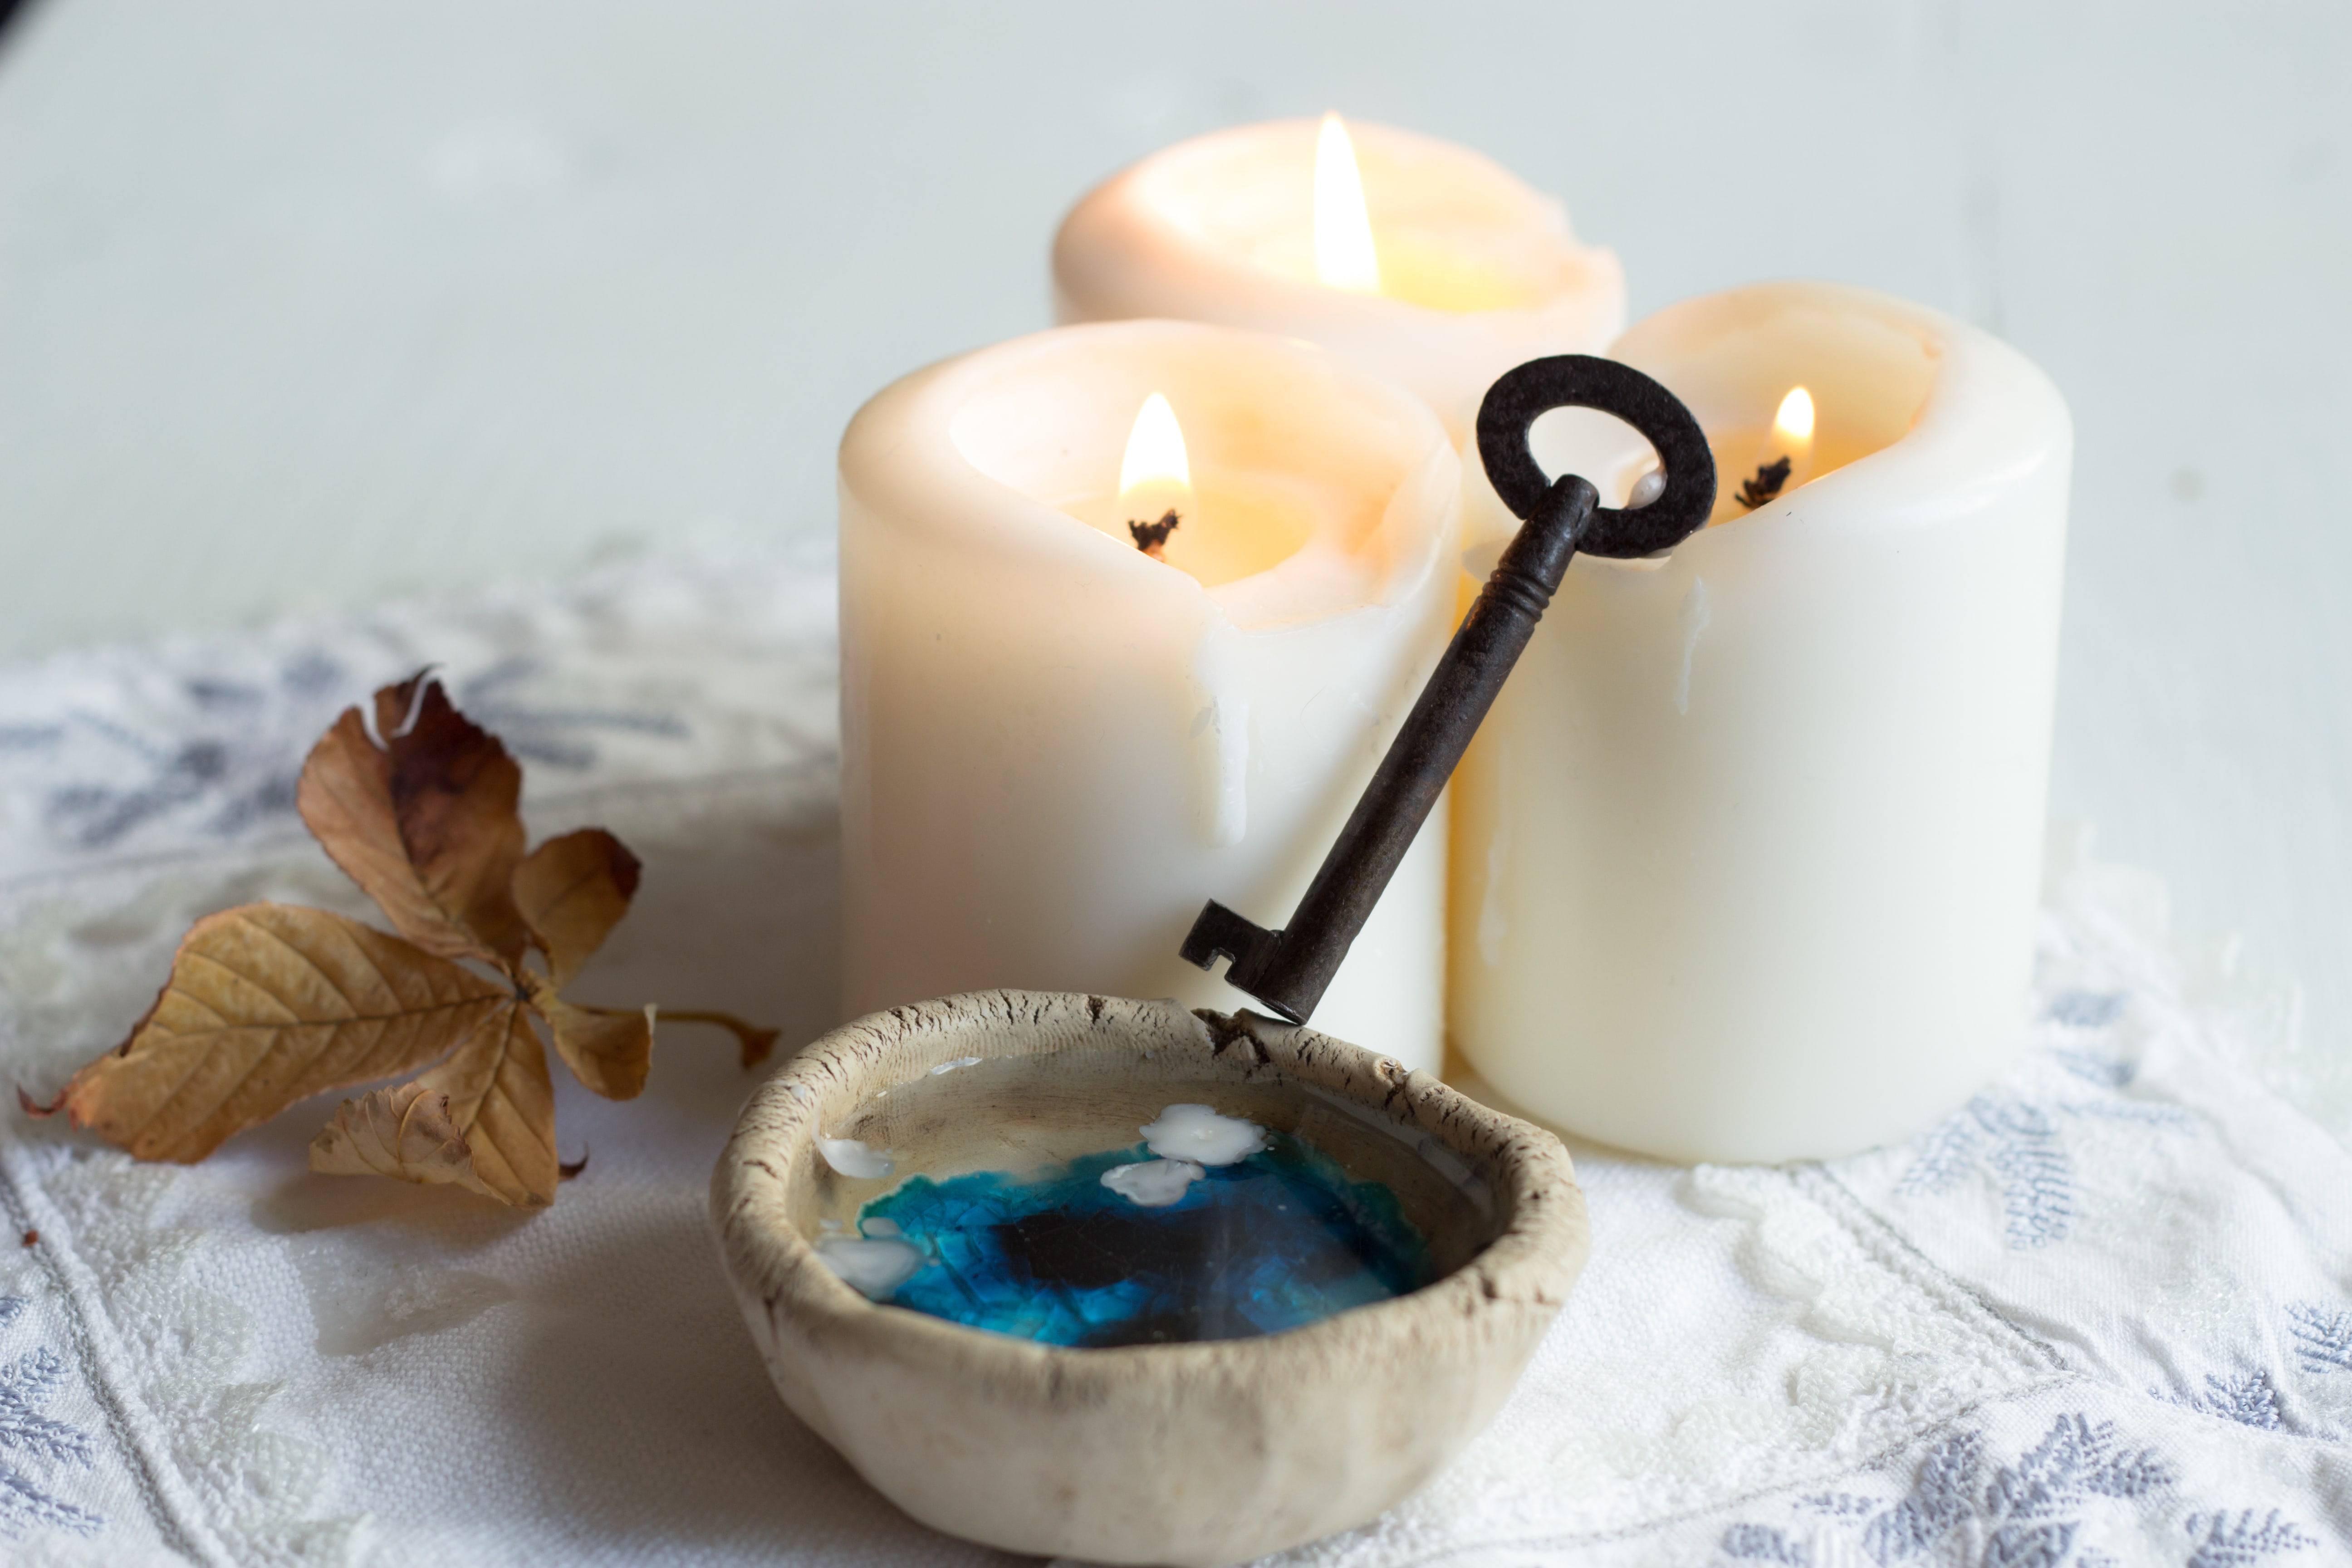 Candles: Healthy or Toxic? | The Strong Movement®